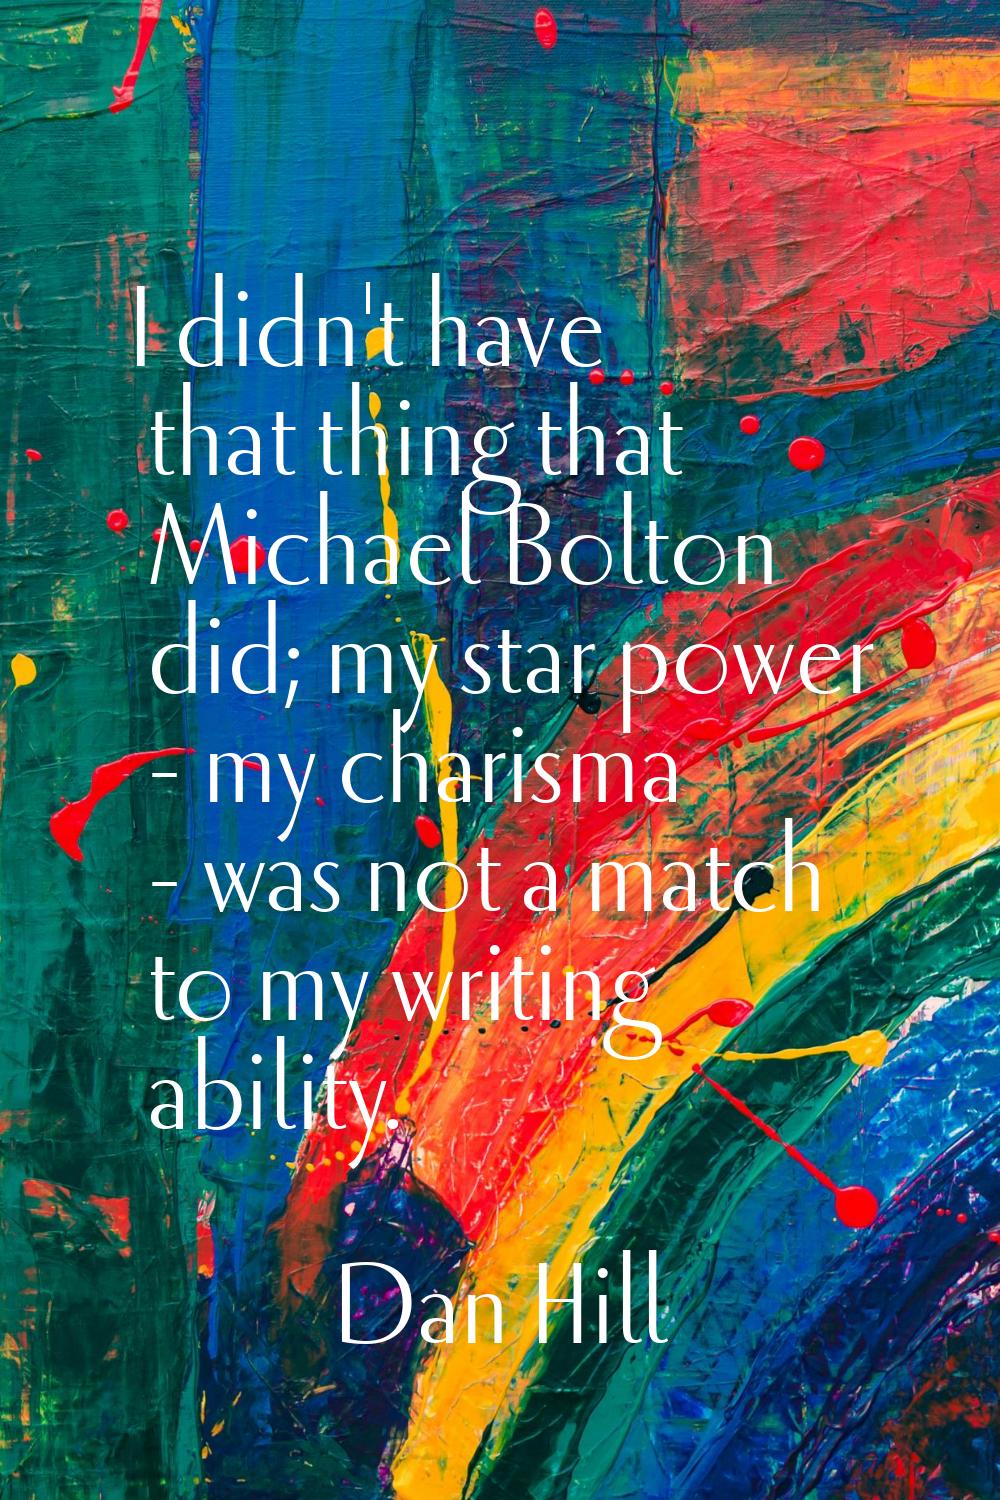 I didn't have that thing that Michael Bolton did; my star power - my charisma - was not a match to 